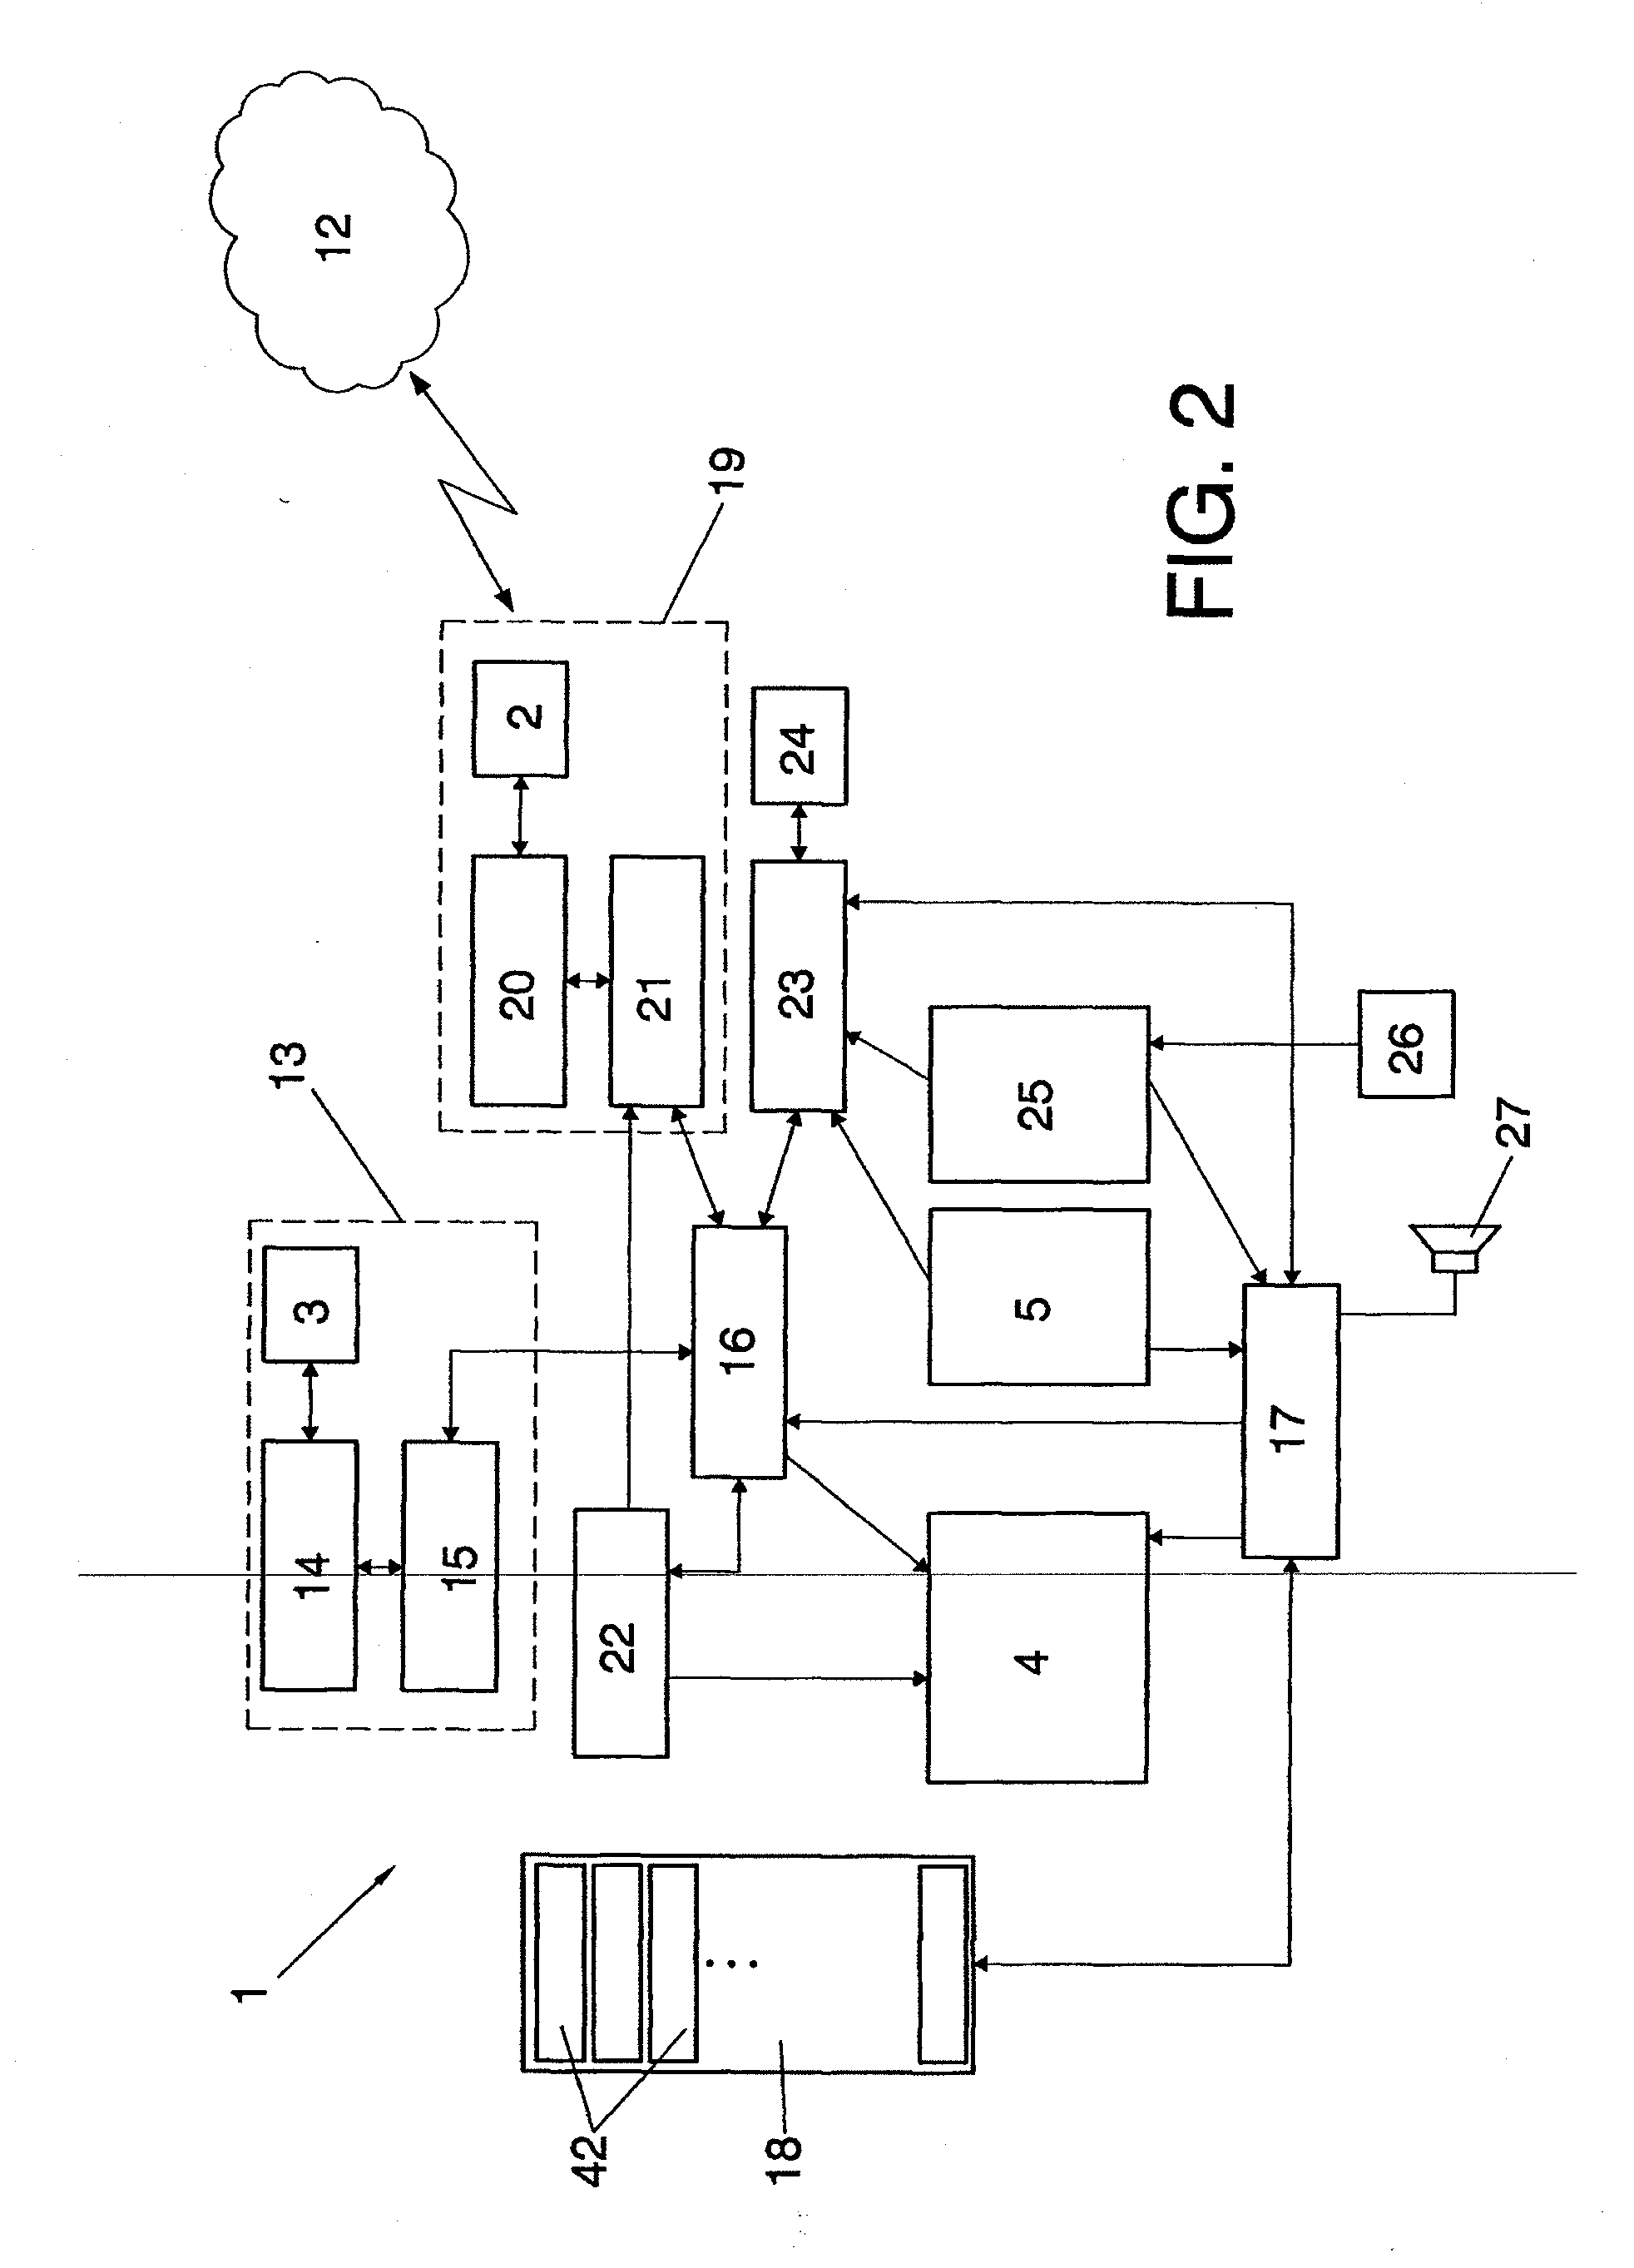 System for wirelessly controlling devices using an apparatus including a mobile telephone